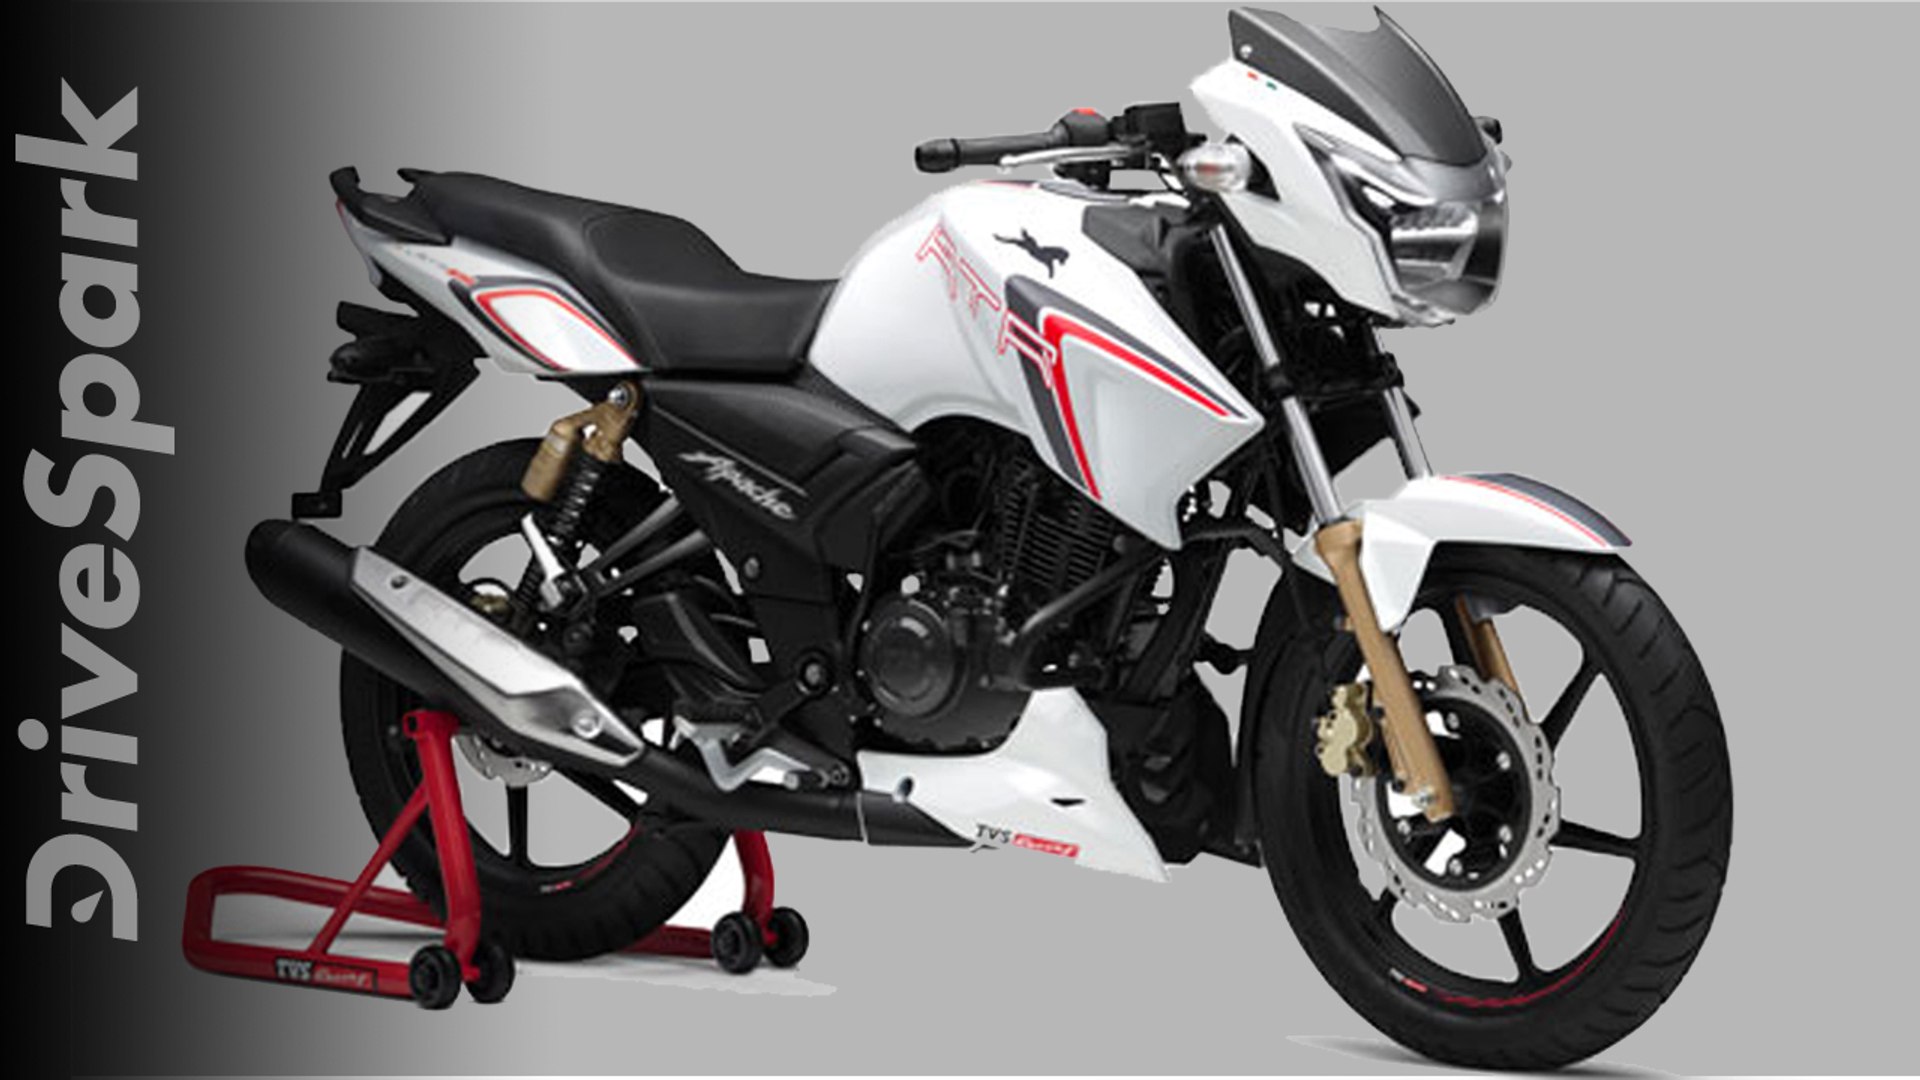 Tvs Apache Rtr 180 Race Edition A Quick Glance Video Dailymotion